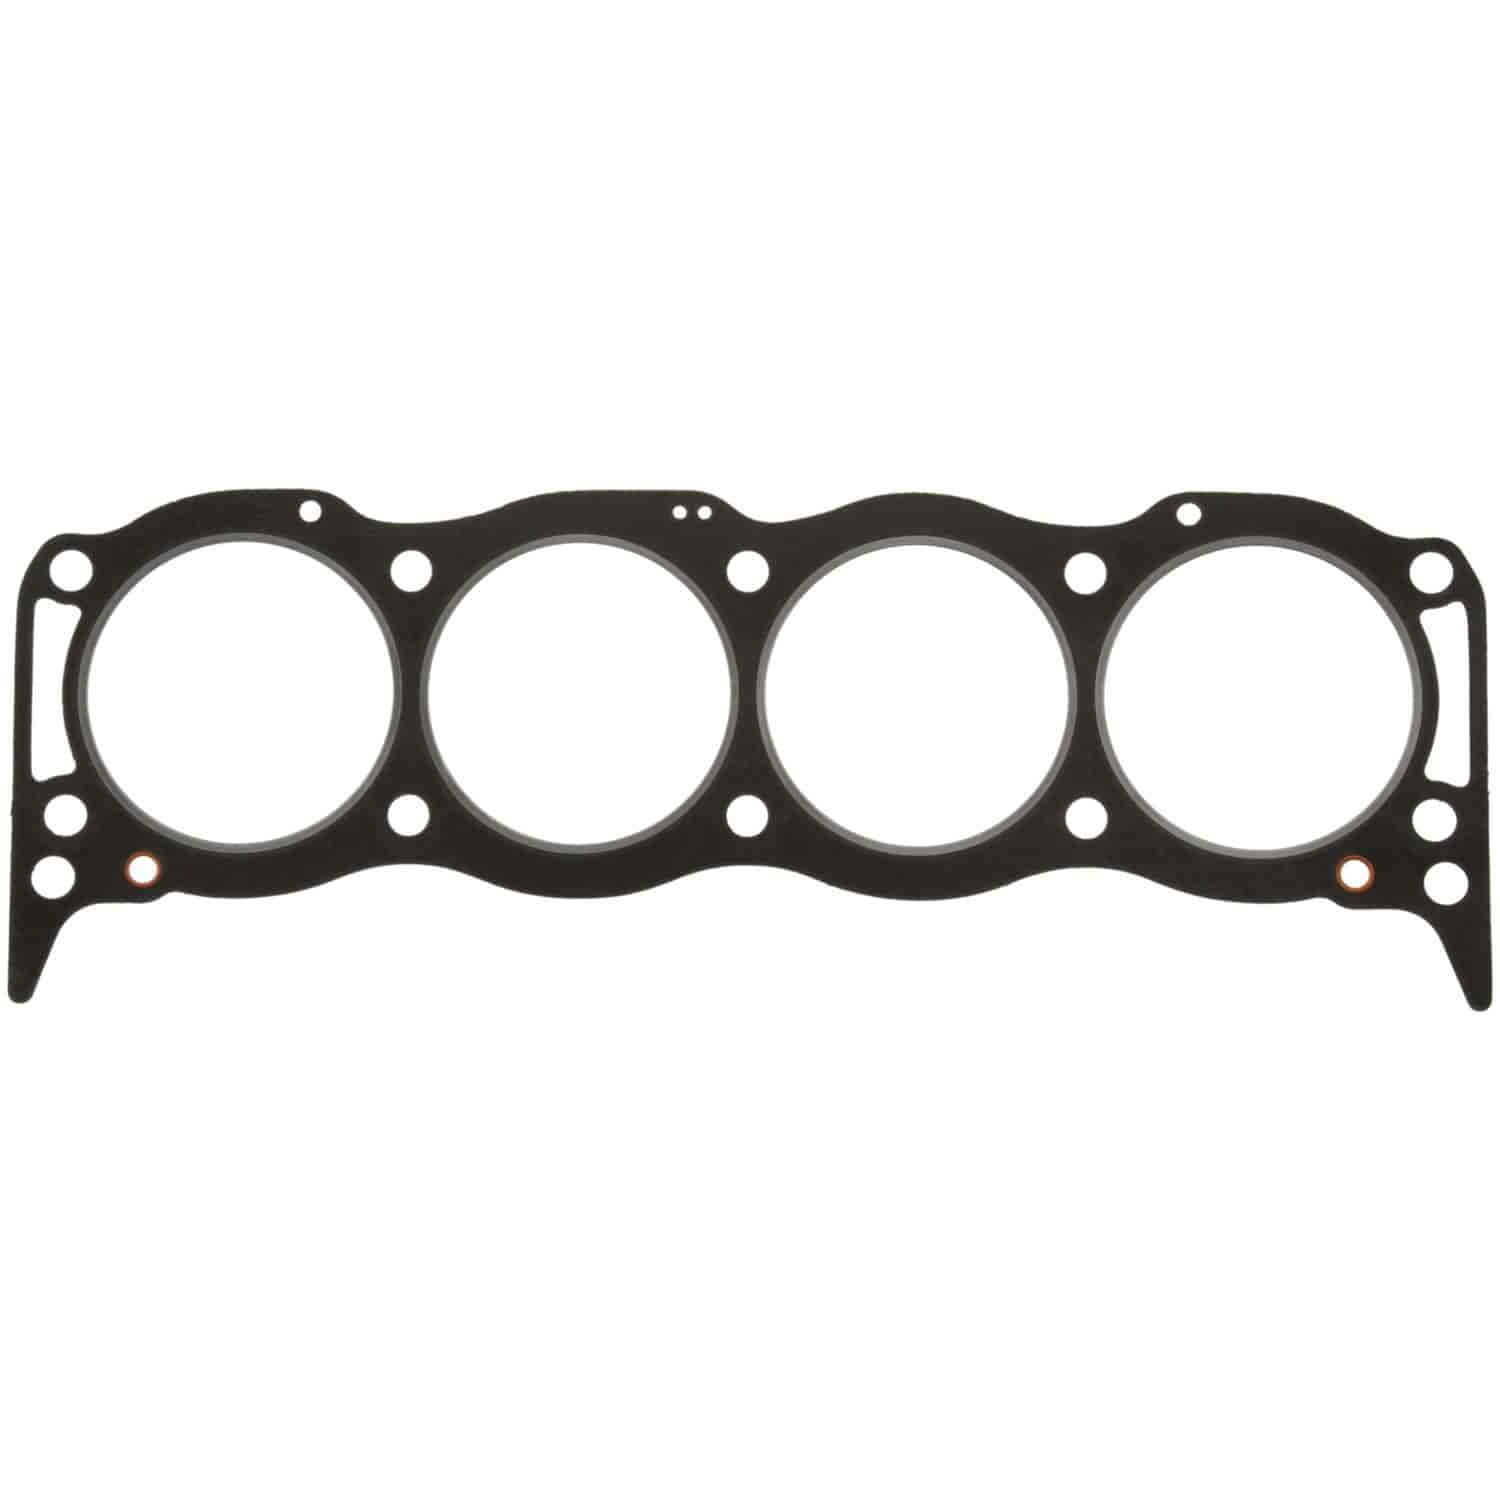 Cylinder Head Gasket Land Rover 3.9L V8 1994-1995 Defender 90 and Discovery I from 01/1994 - Up